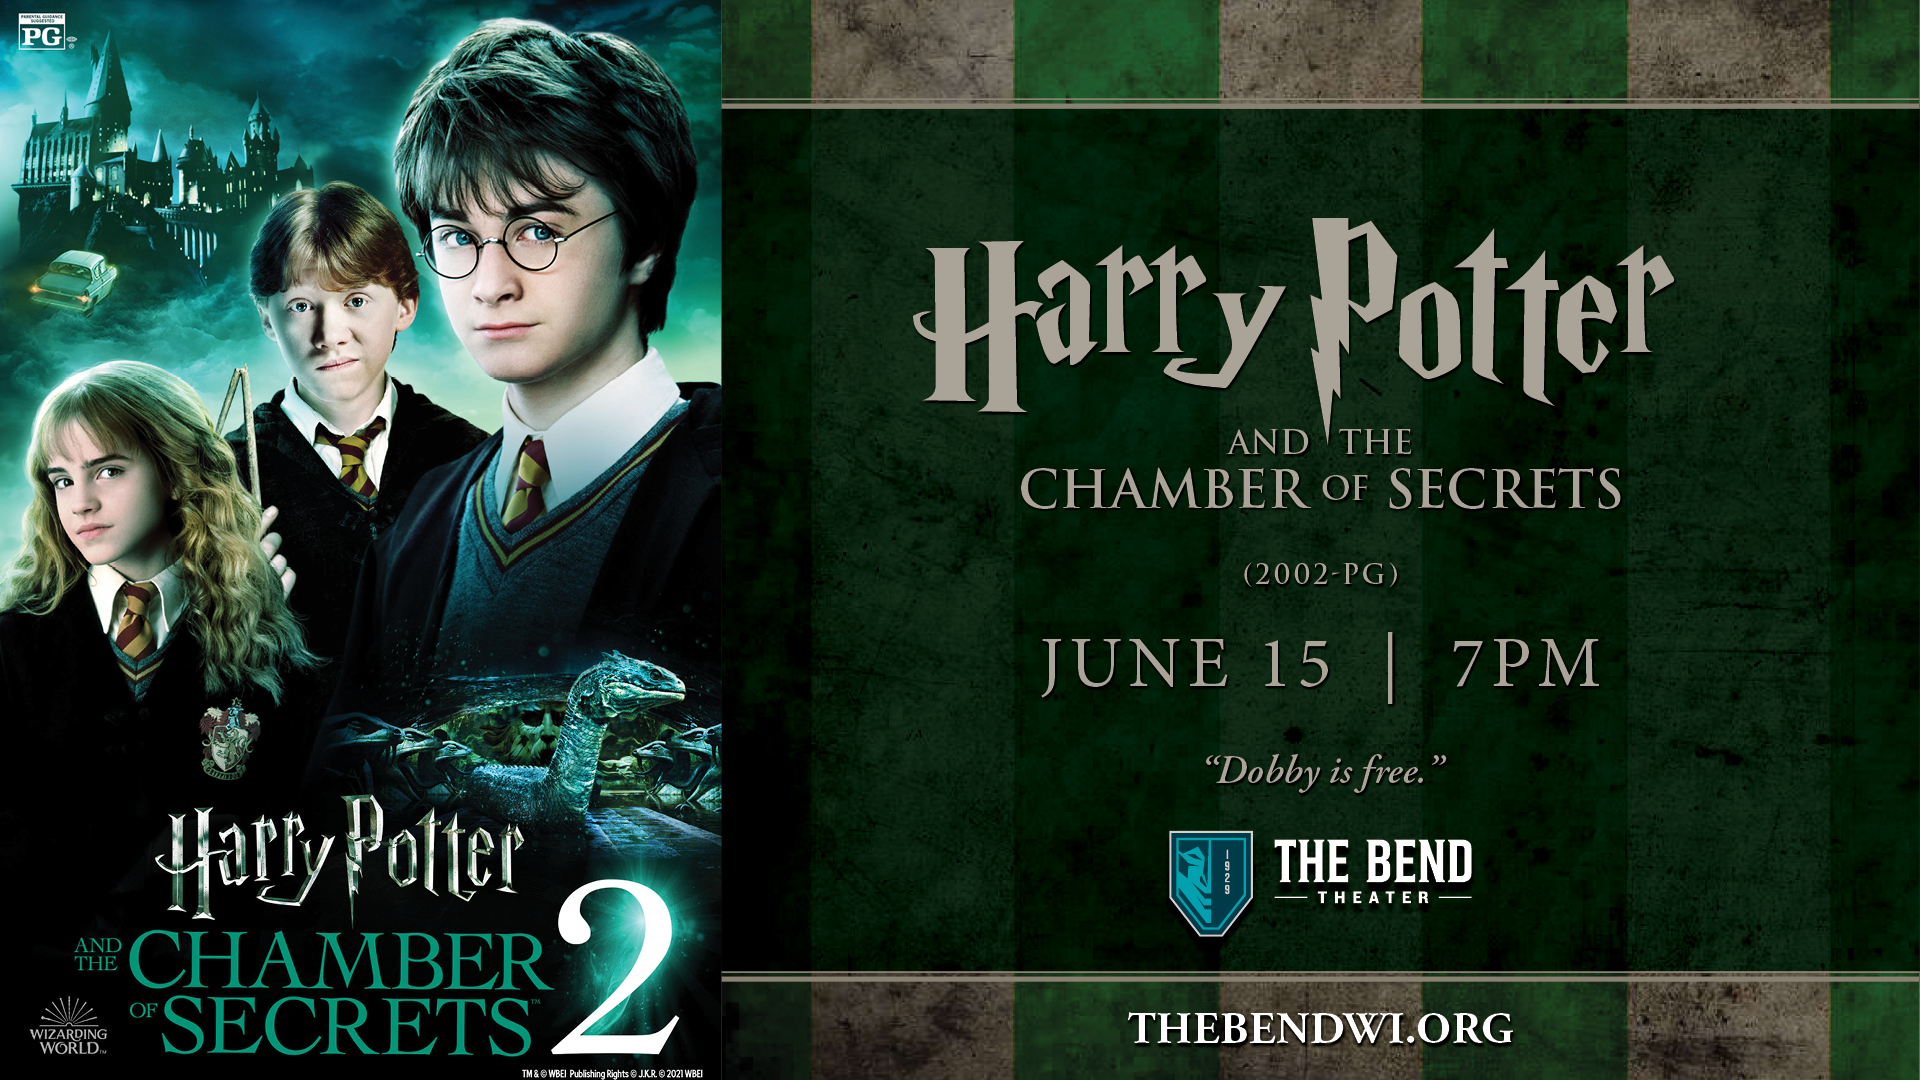 Wizarding World Nights at The Bend Theater: Harry Potter and The Chamber of Secrets (2002 - PG)